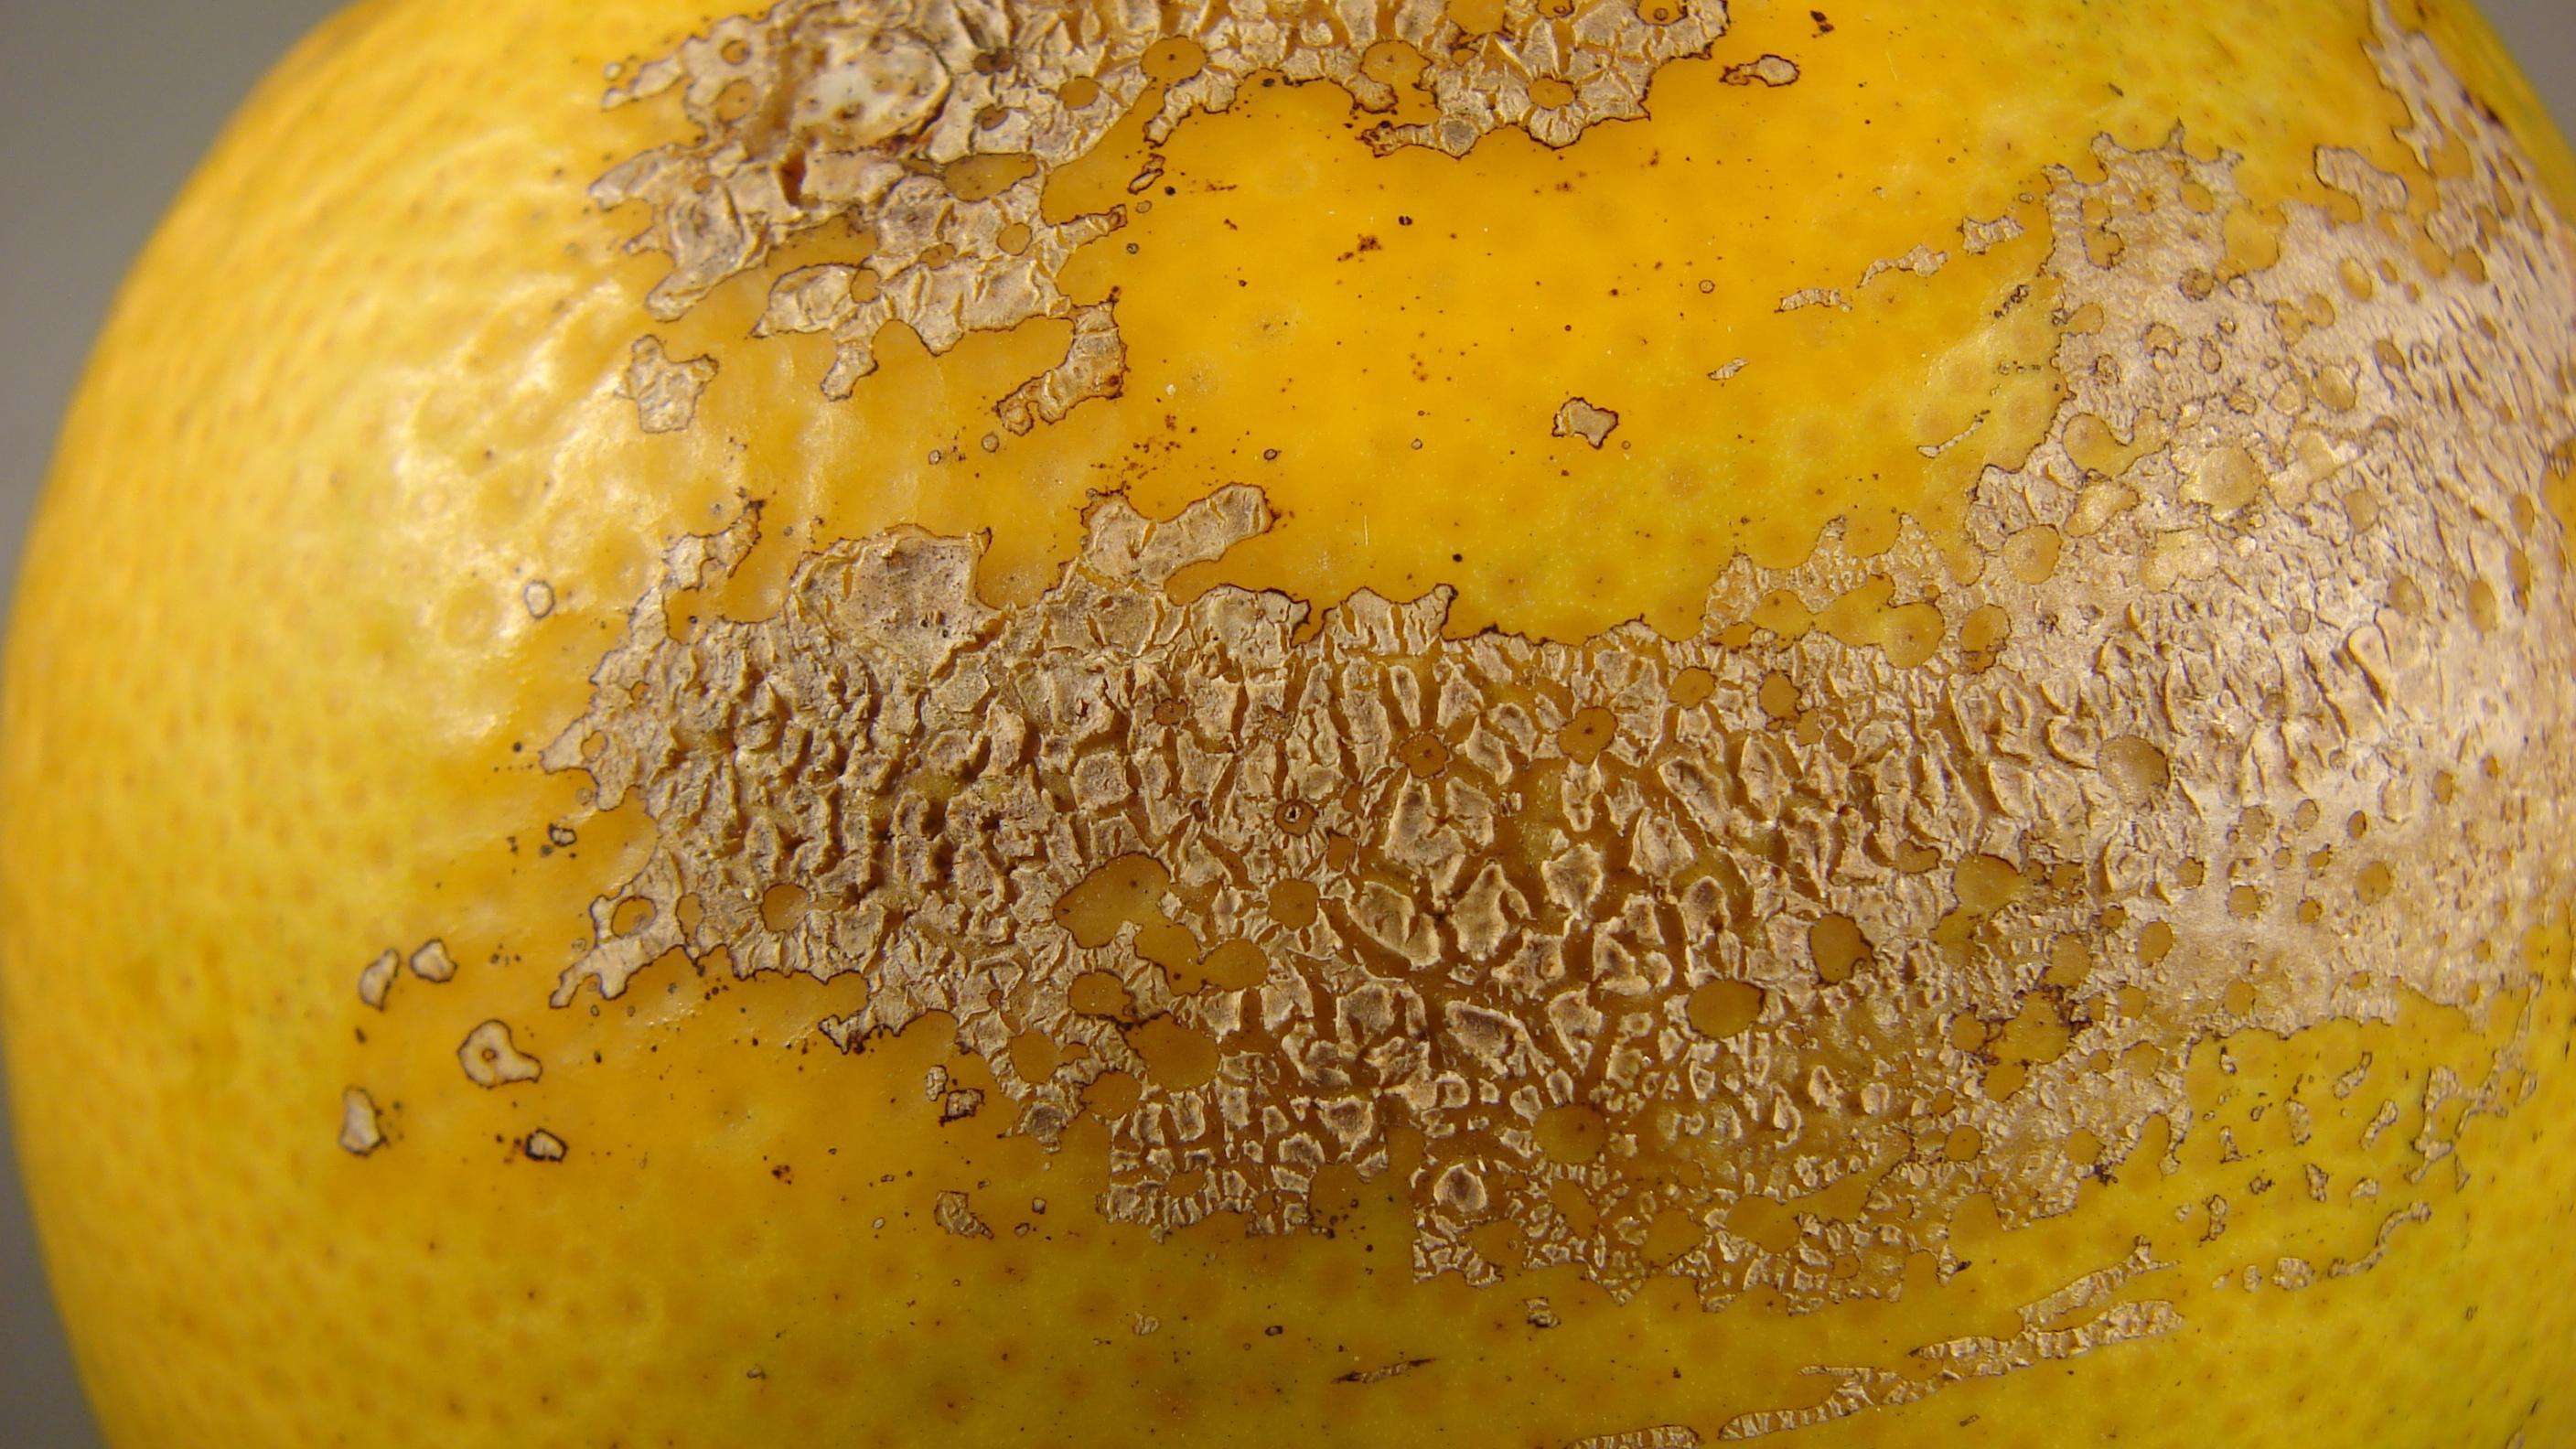 Scab-like lesions on a grapefruit.